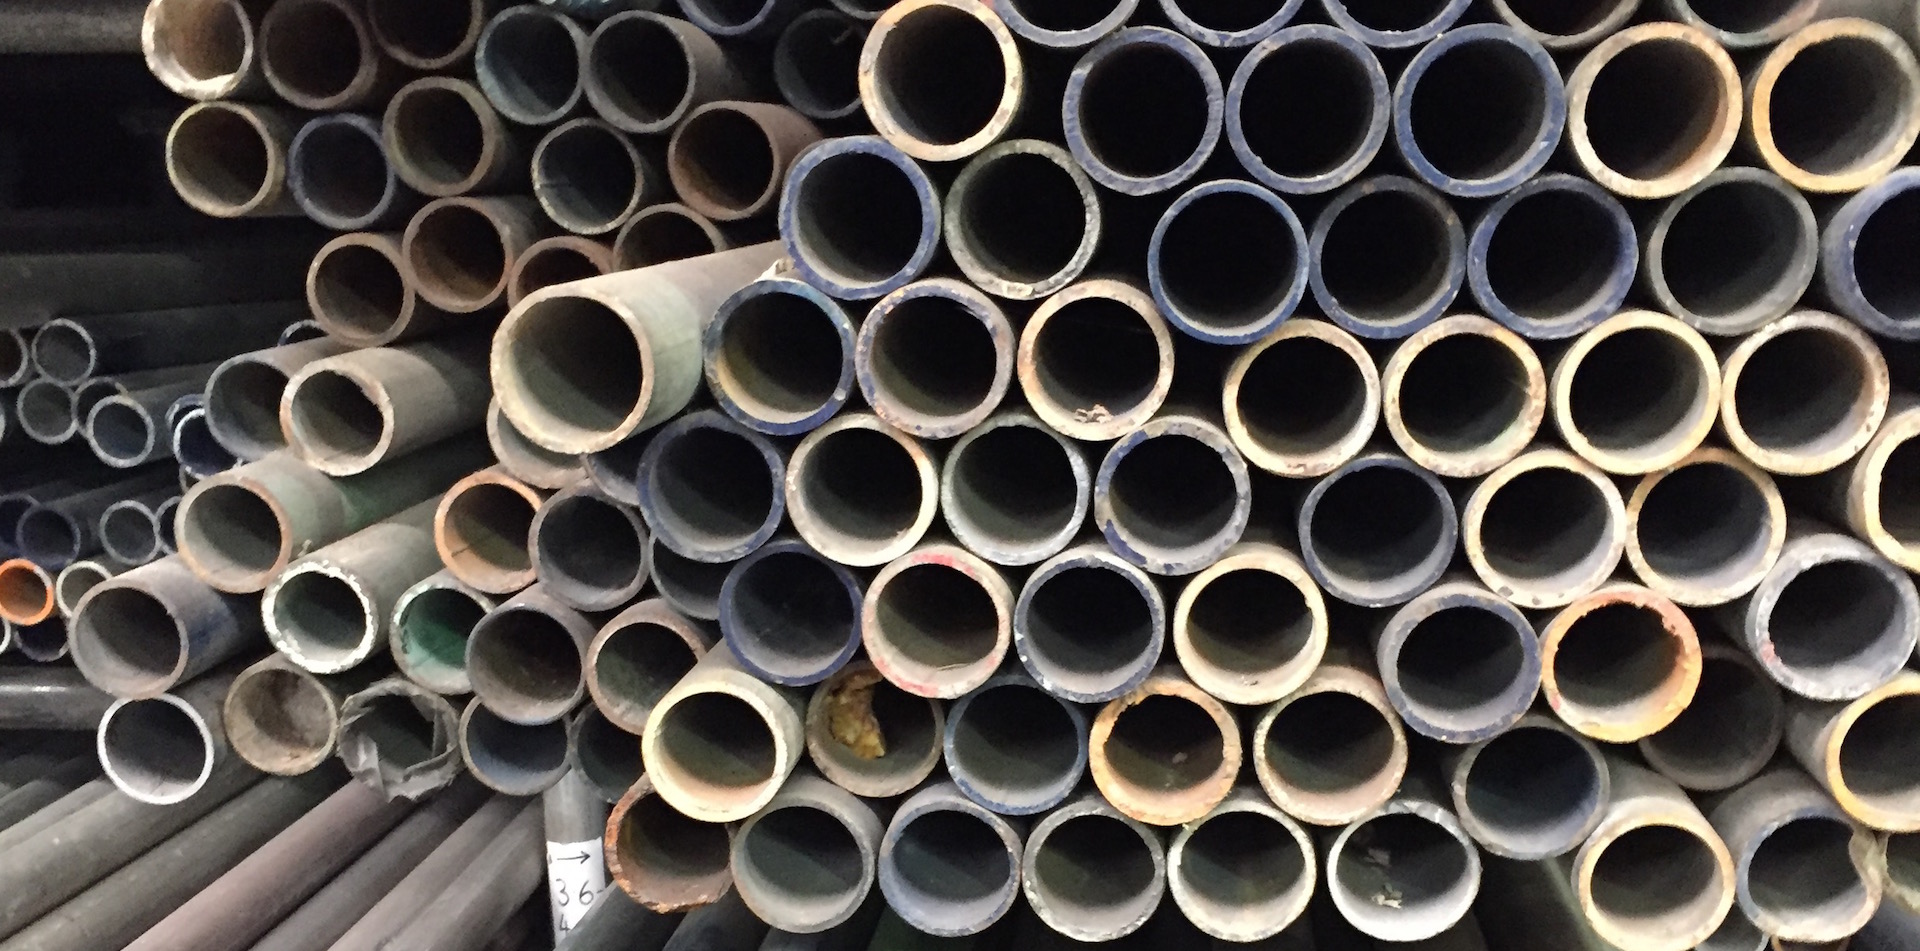 Steel Tubes in every size from 0.5m to 6.5m